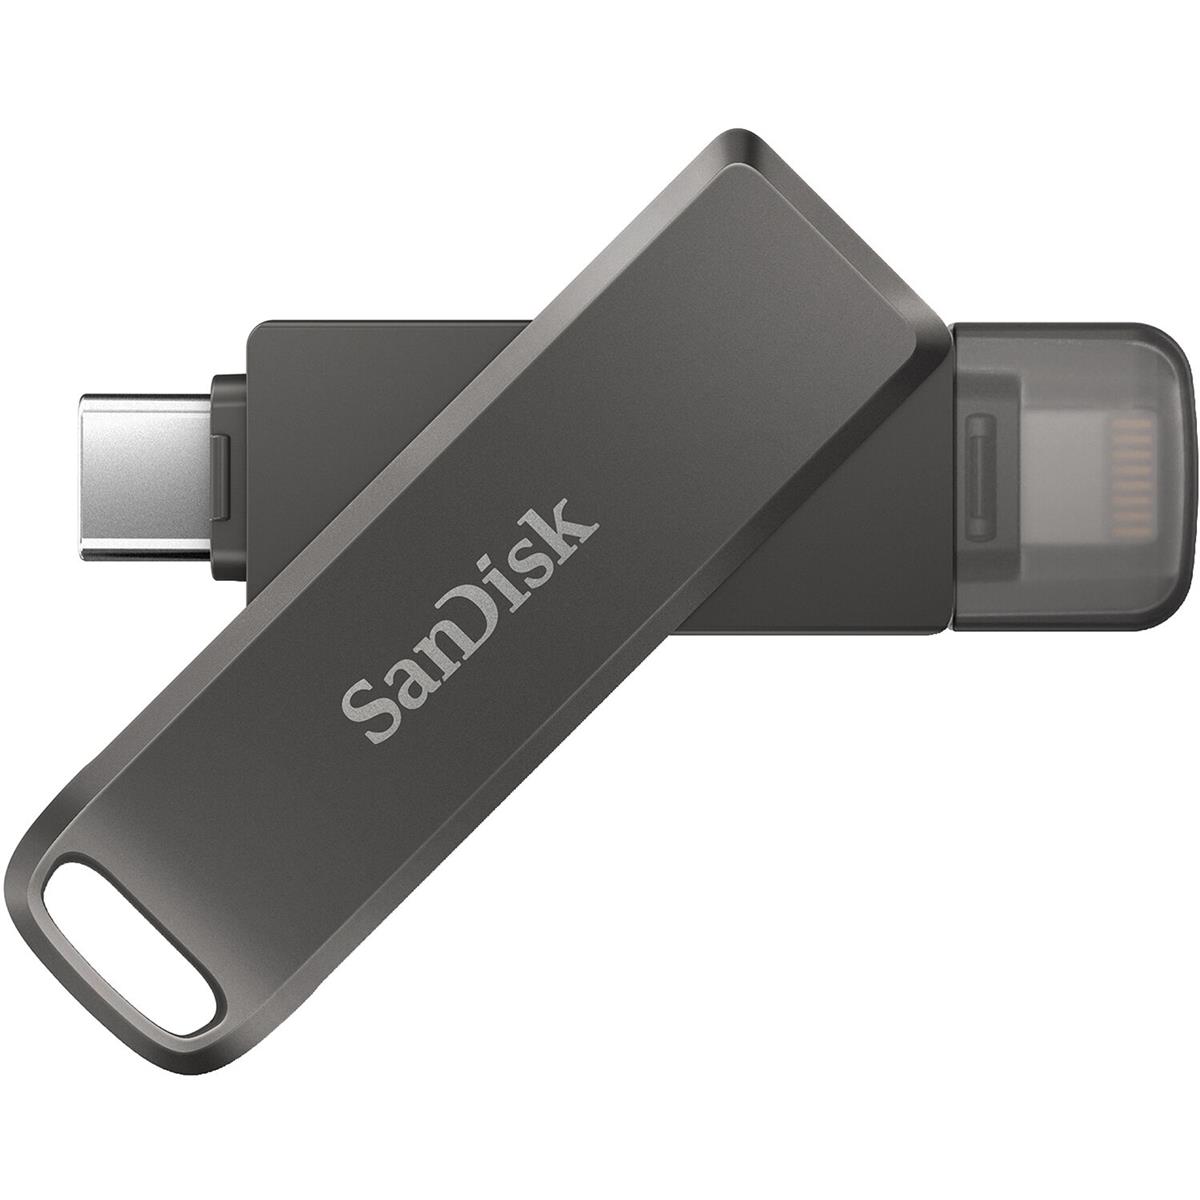 Image of SanDisk iXpand Luxe 256GB Flash Drive